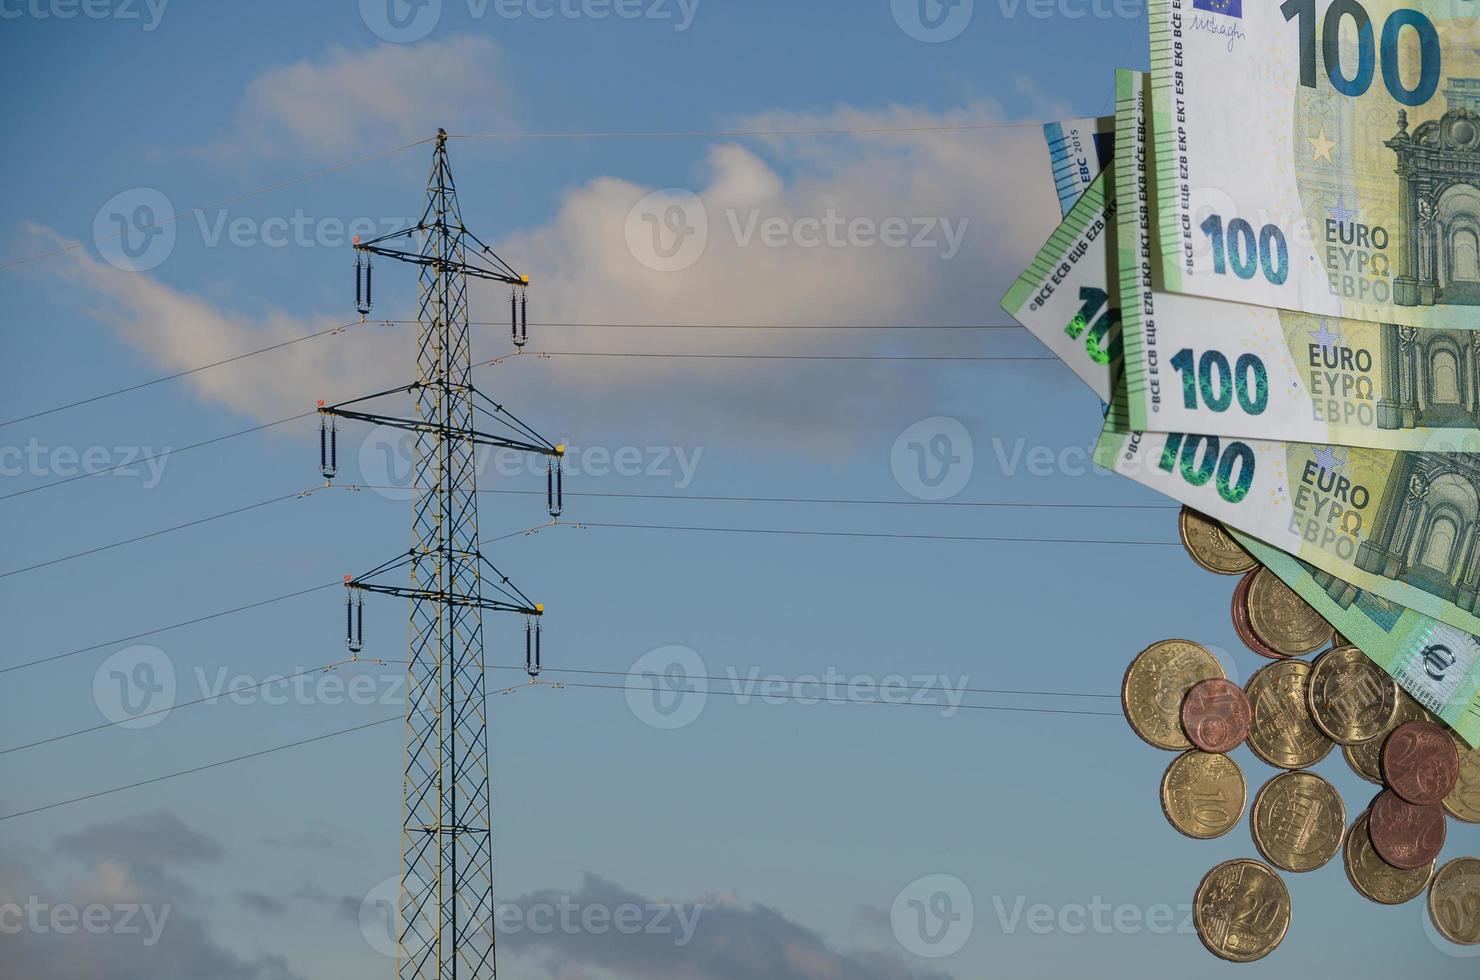 single electricity pylon with many euro bills and coins regarding electricity price increases photo